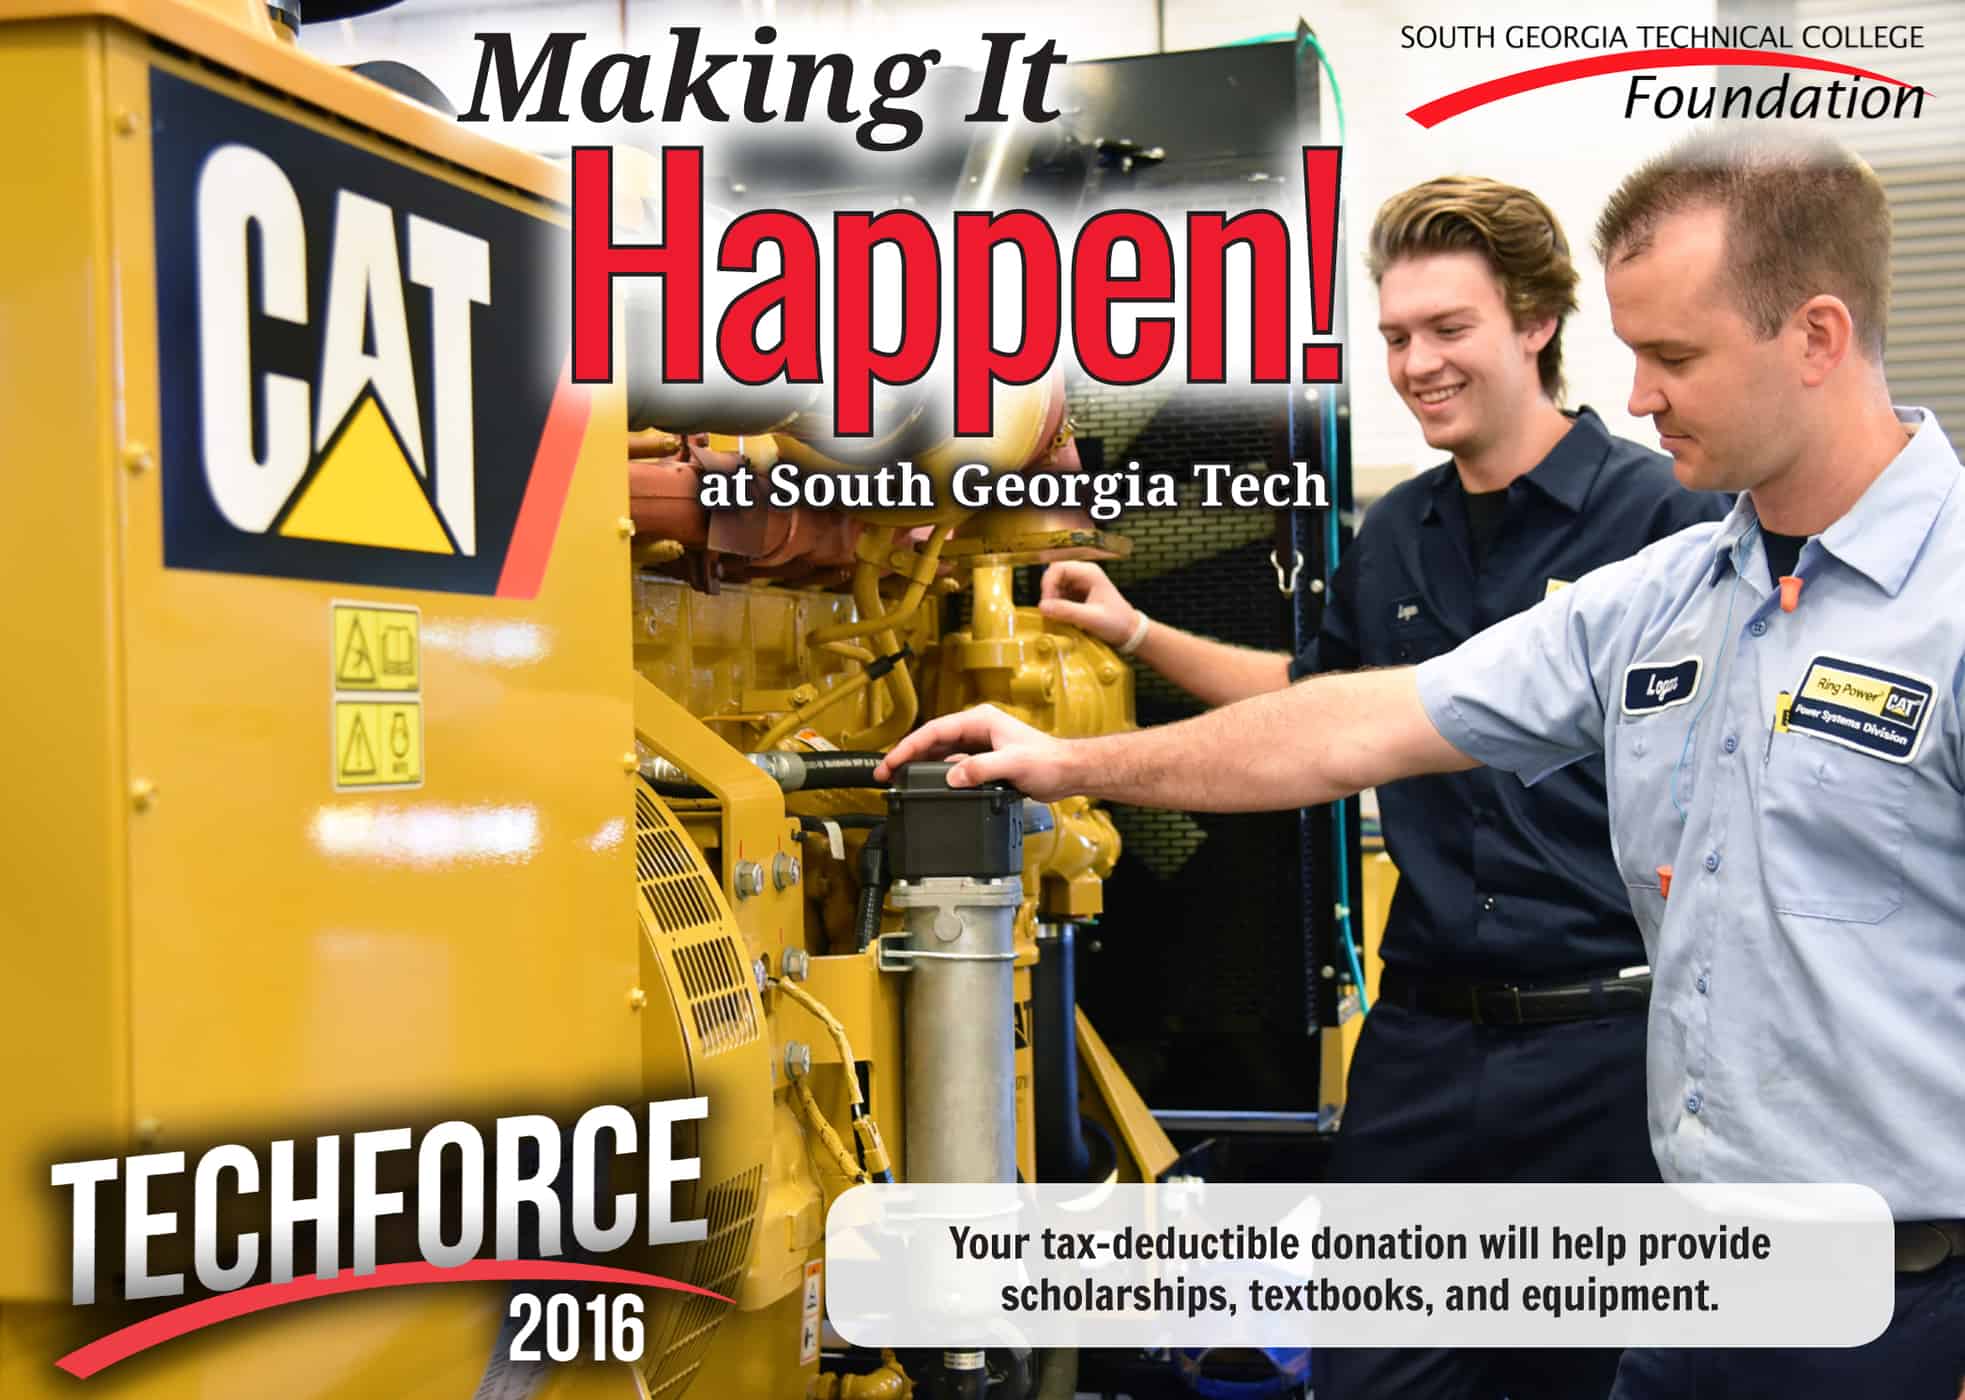 Shown above is the TechForce 2016 postcard design with the Foundation’s “Making it Happen at South Georgia Tech” theme.